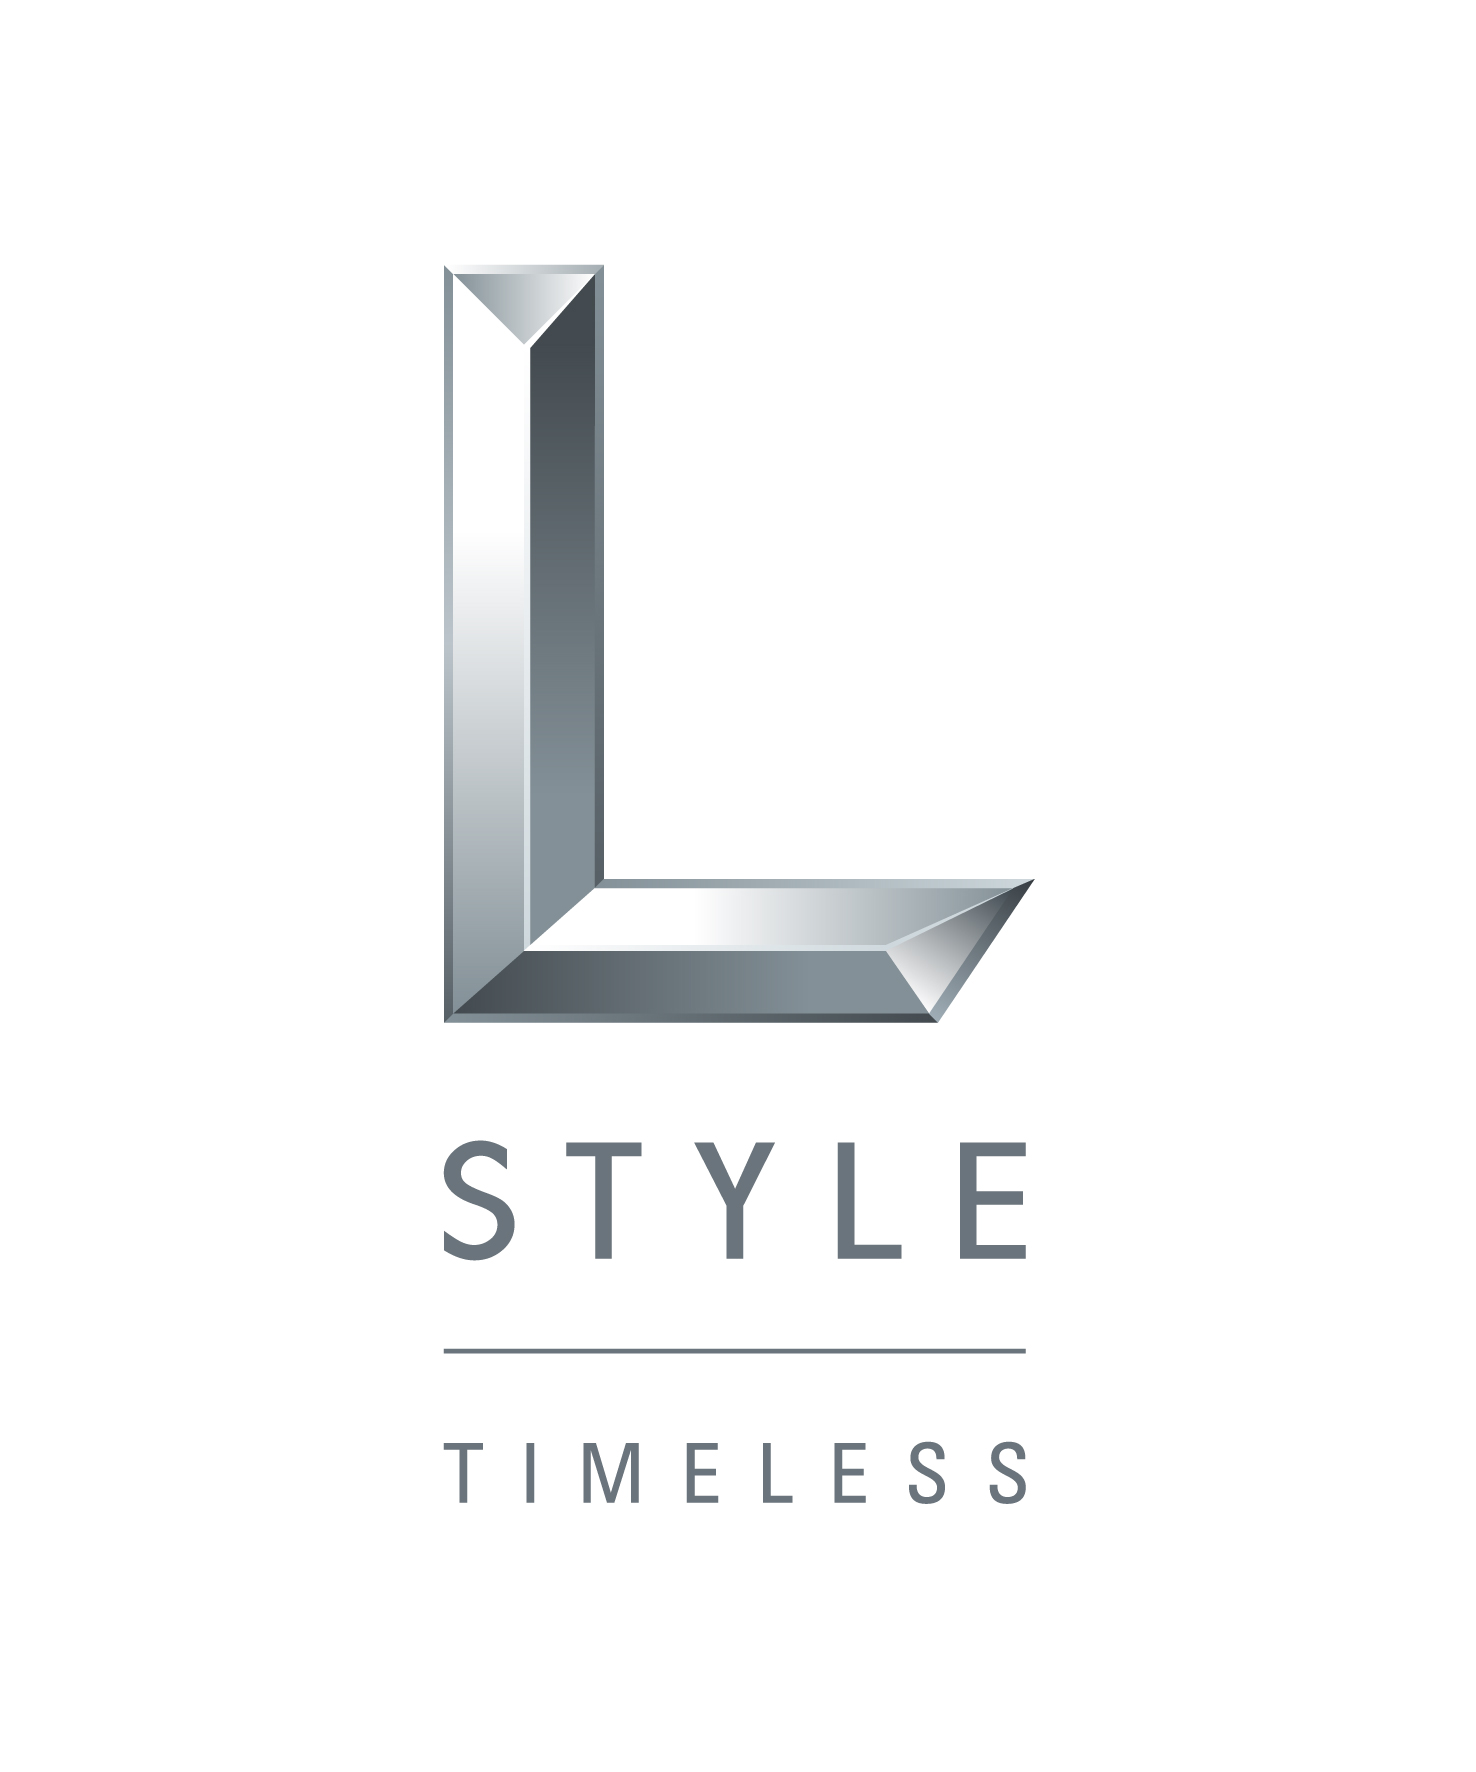 Visual identity of L-Style